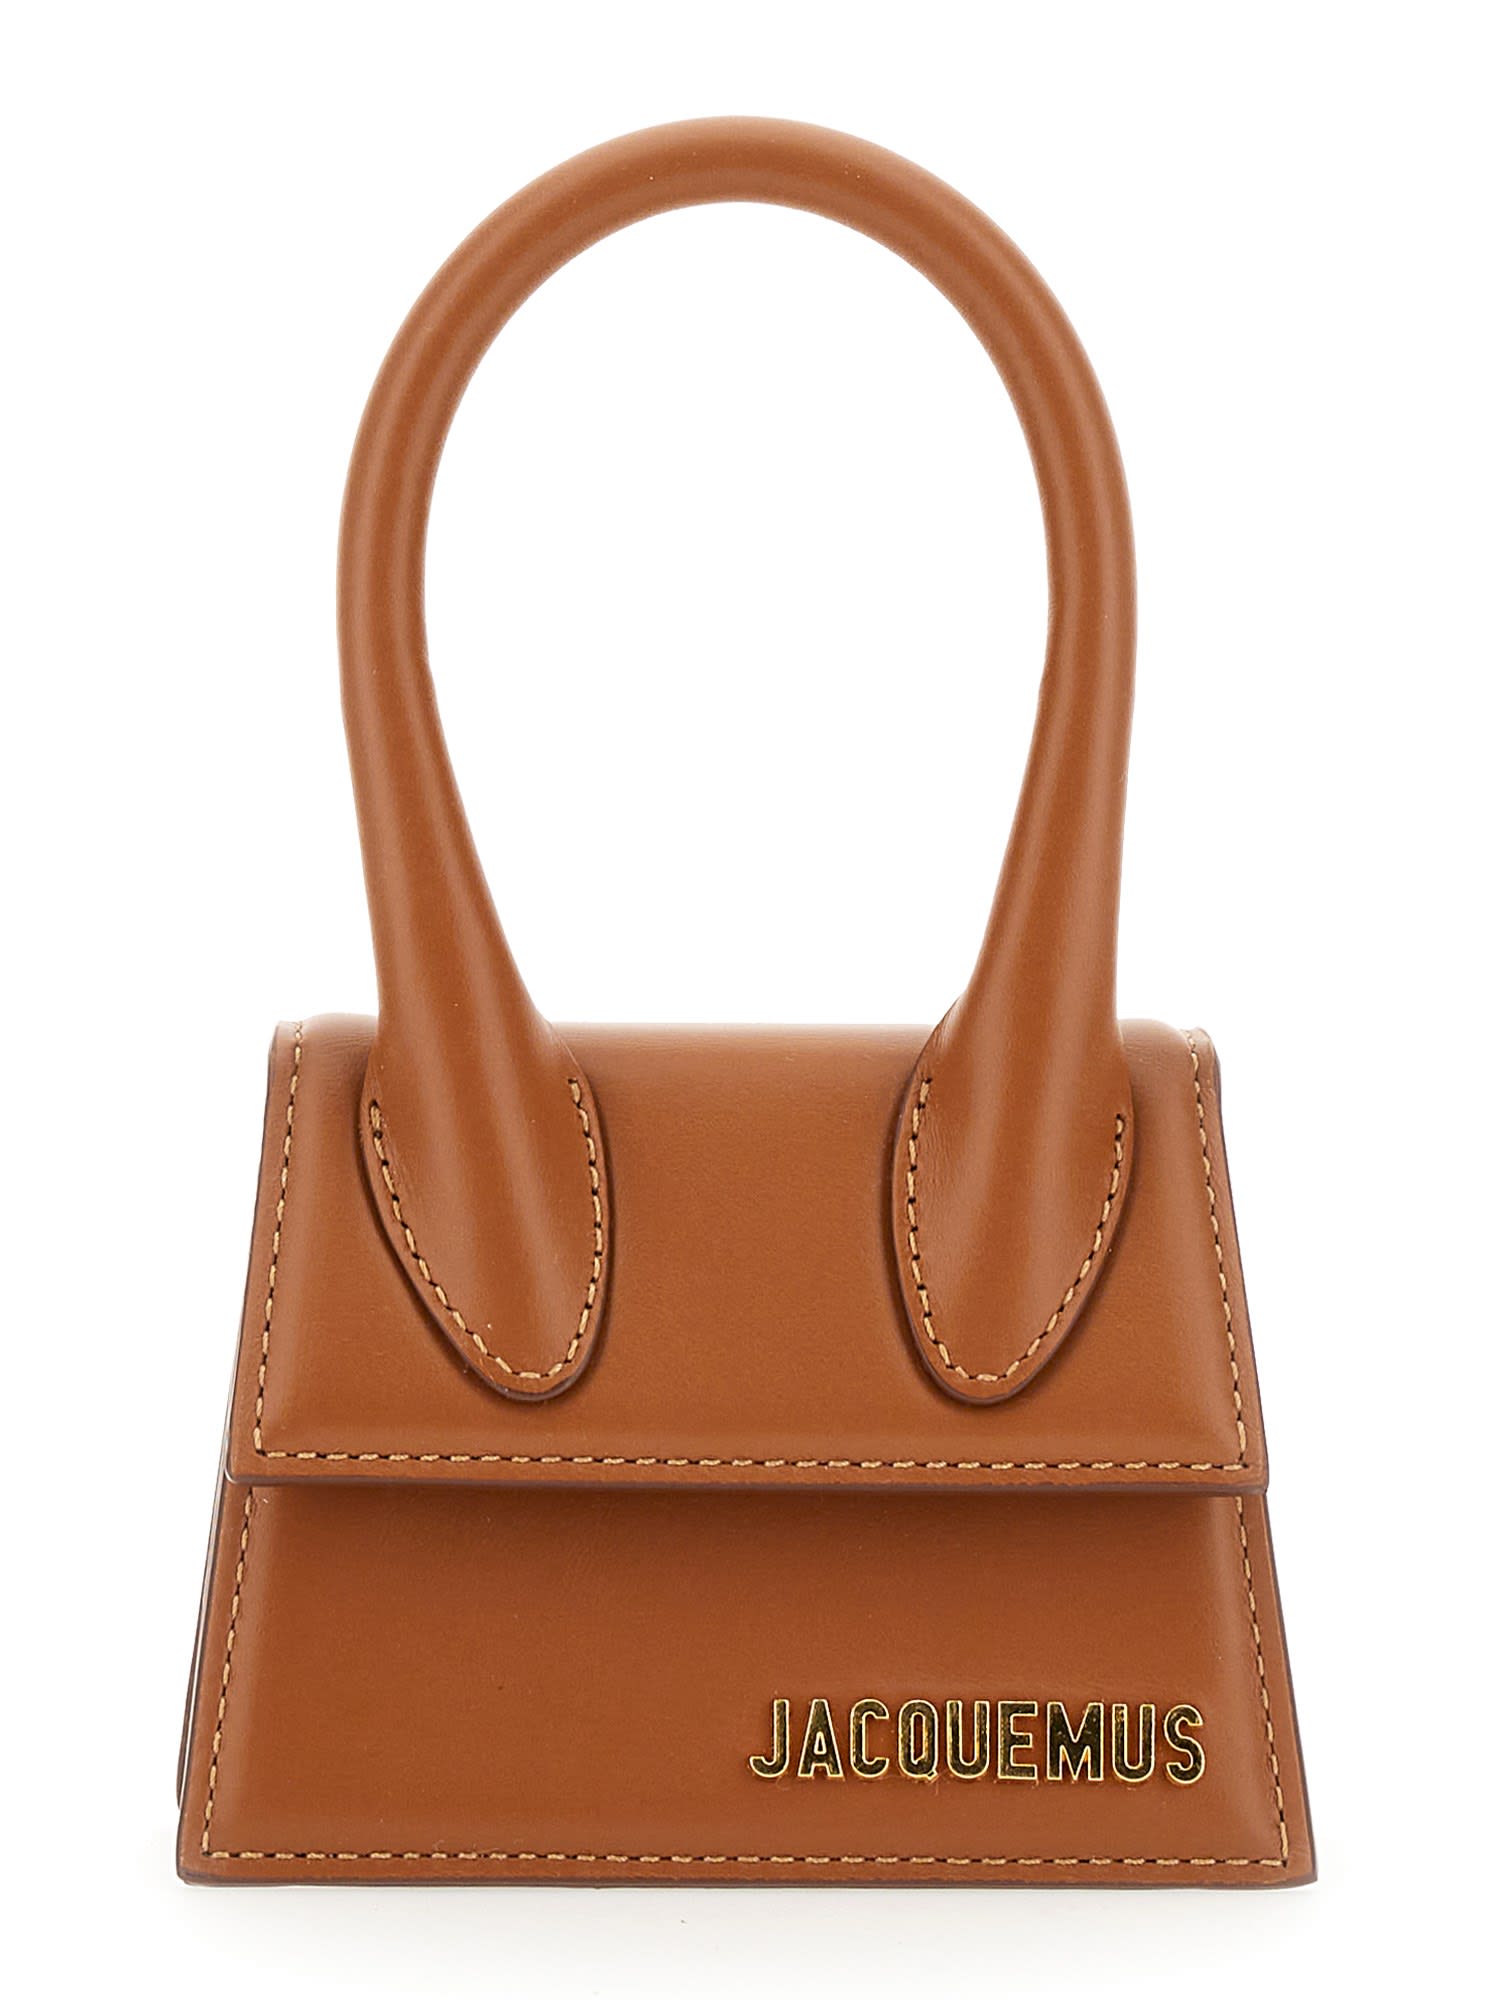 Jacquemus Le Chiquito Bag In Brown